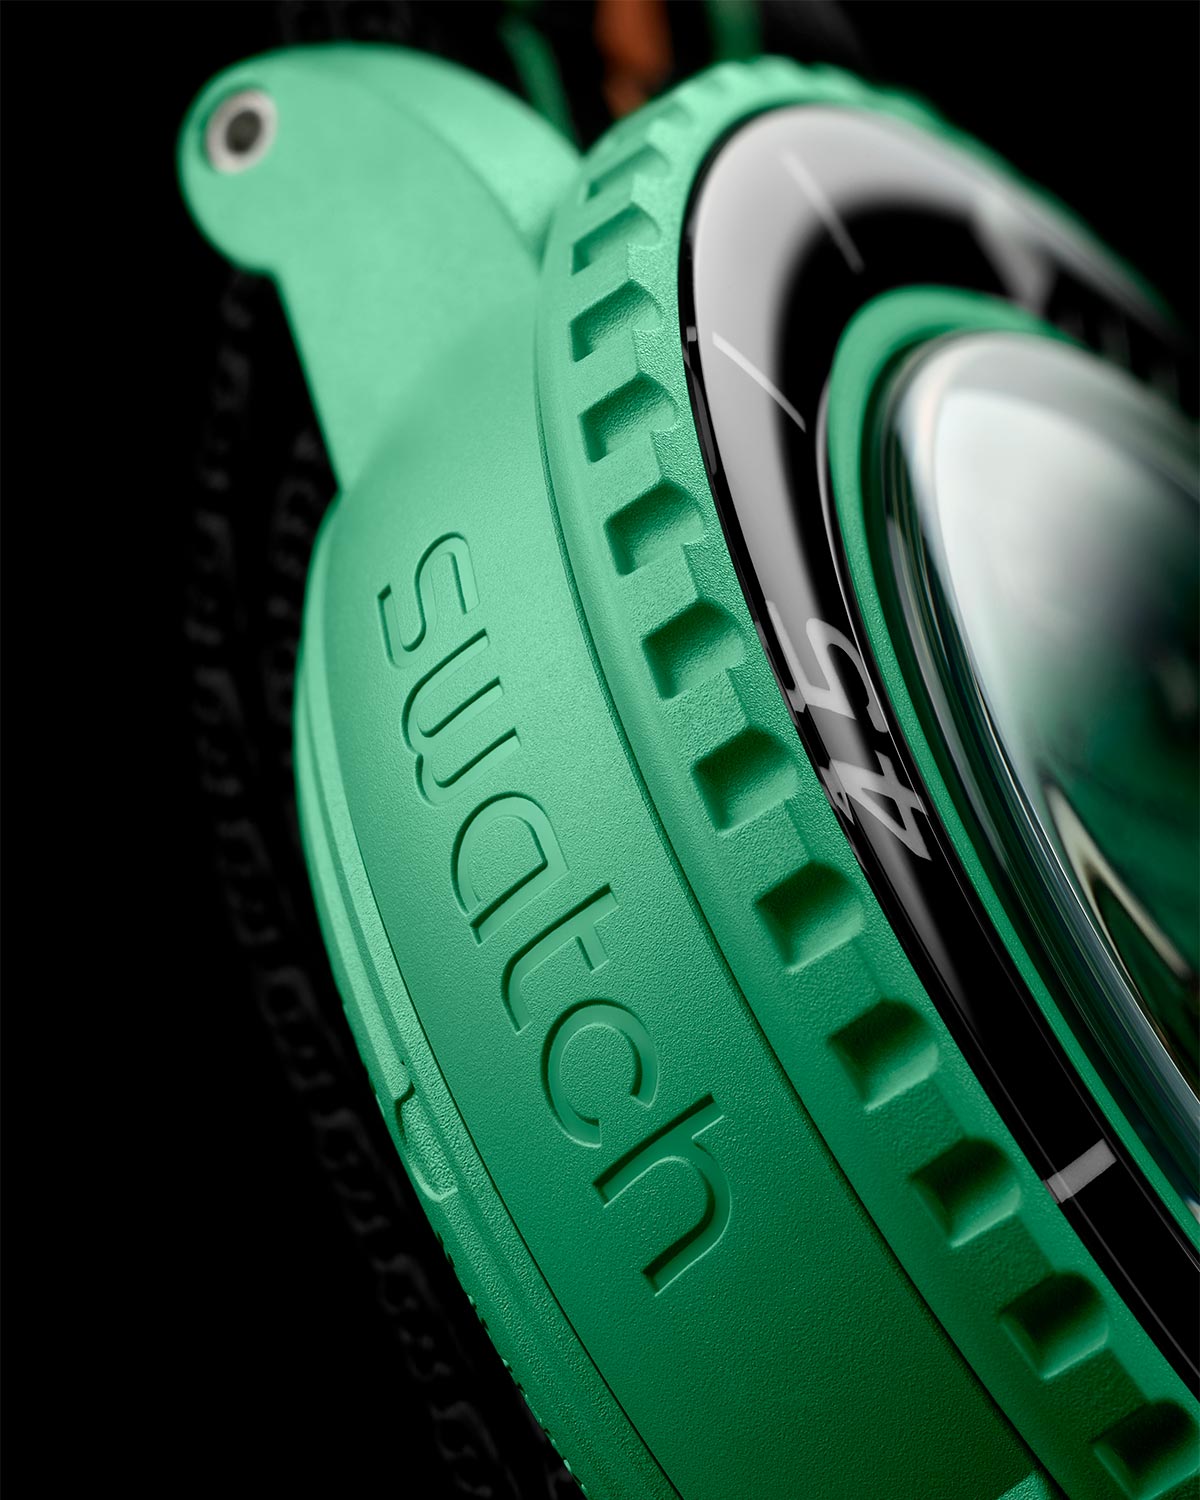 Blancpain X Swatch - Bioceramic Scuba Fifty Fathoms Collection